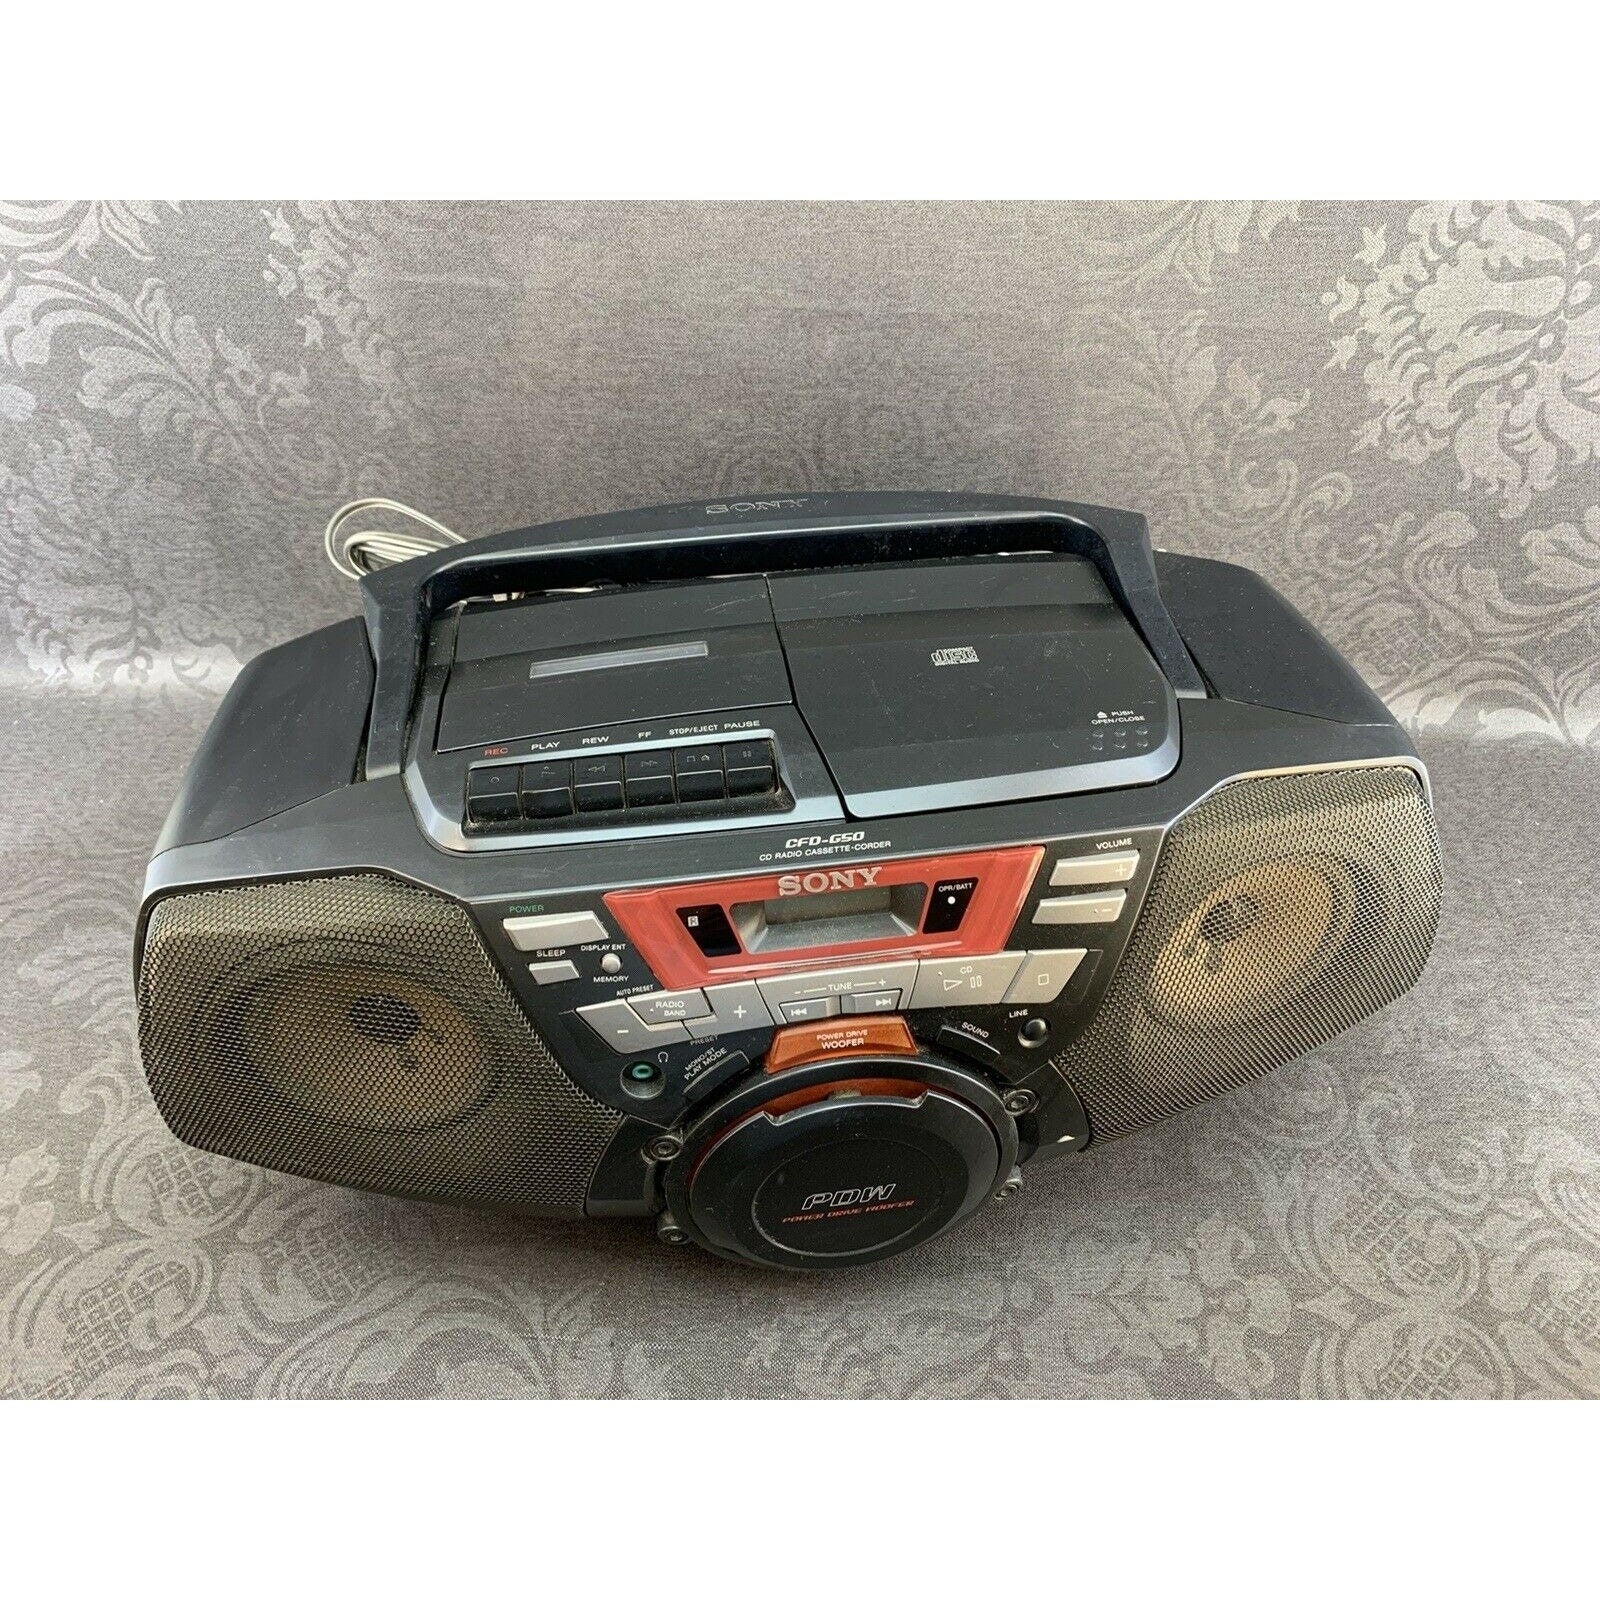 Sony CD/Radio/Cassette Boombox Portable Stereo CFD-G50 Woofer